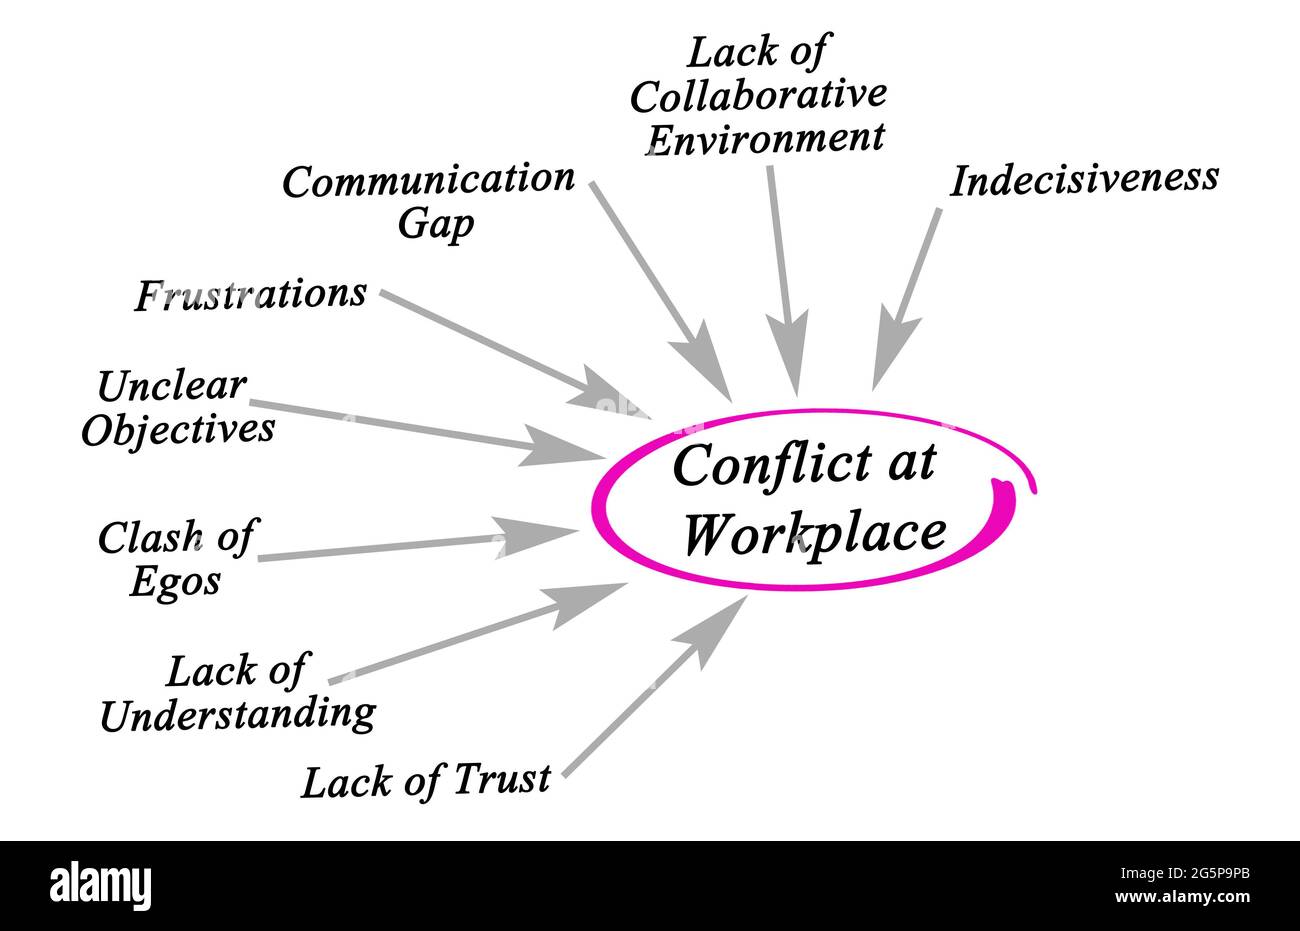 Causes Of Conflicts At Workplace Stock Photo Alamy